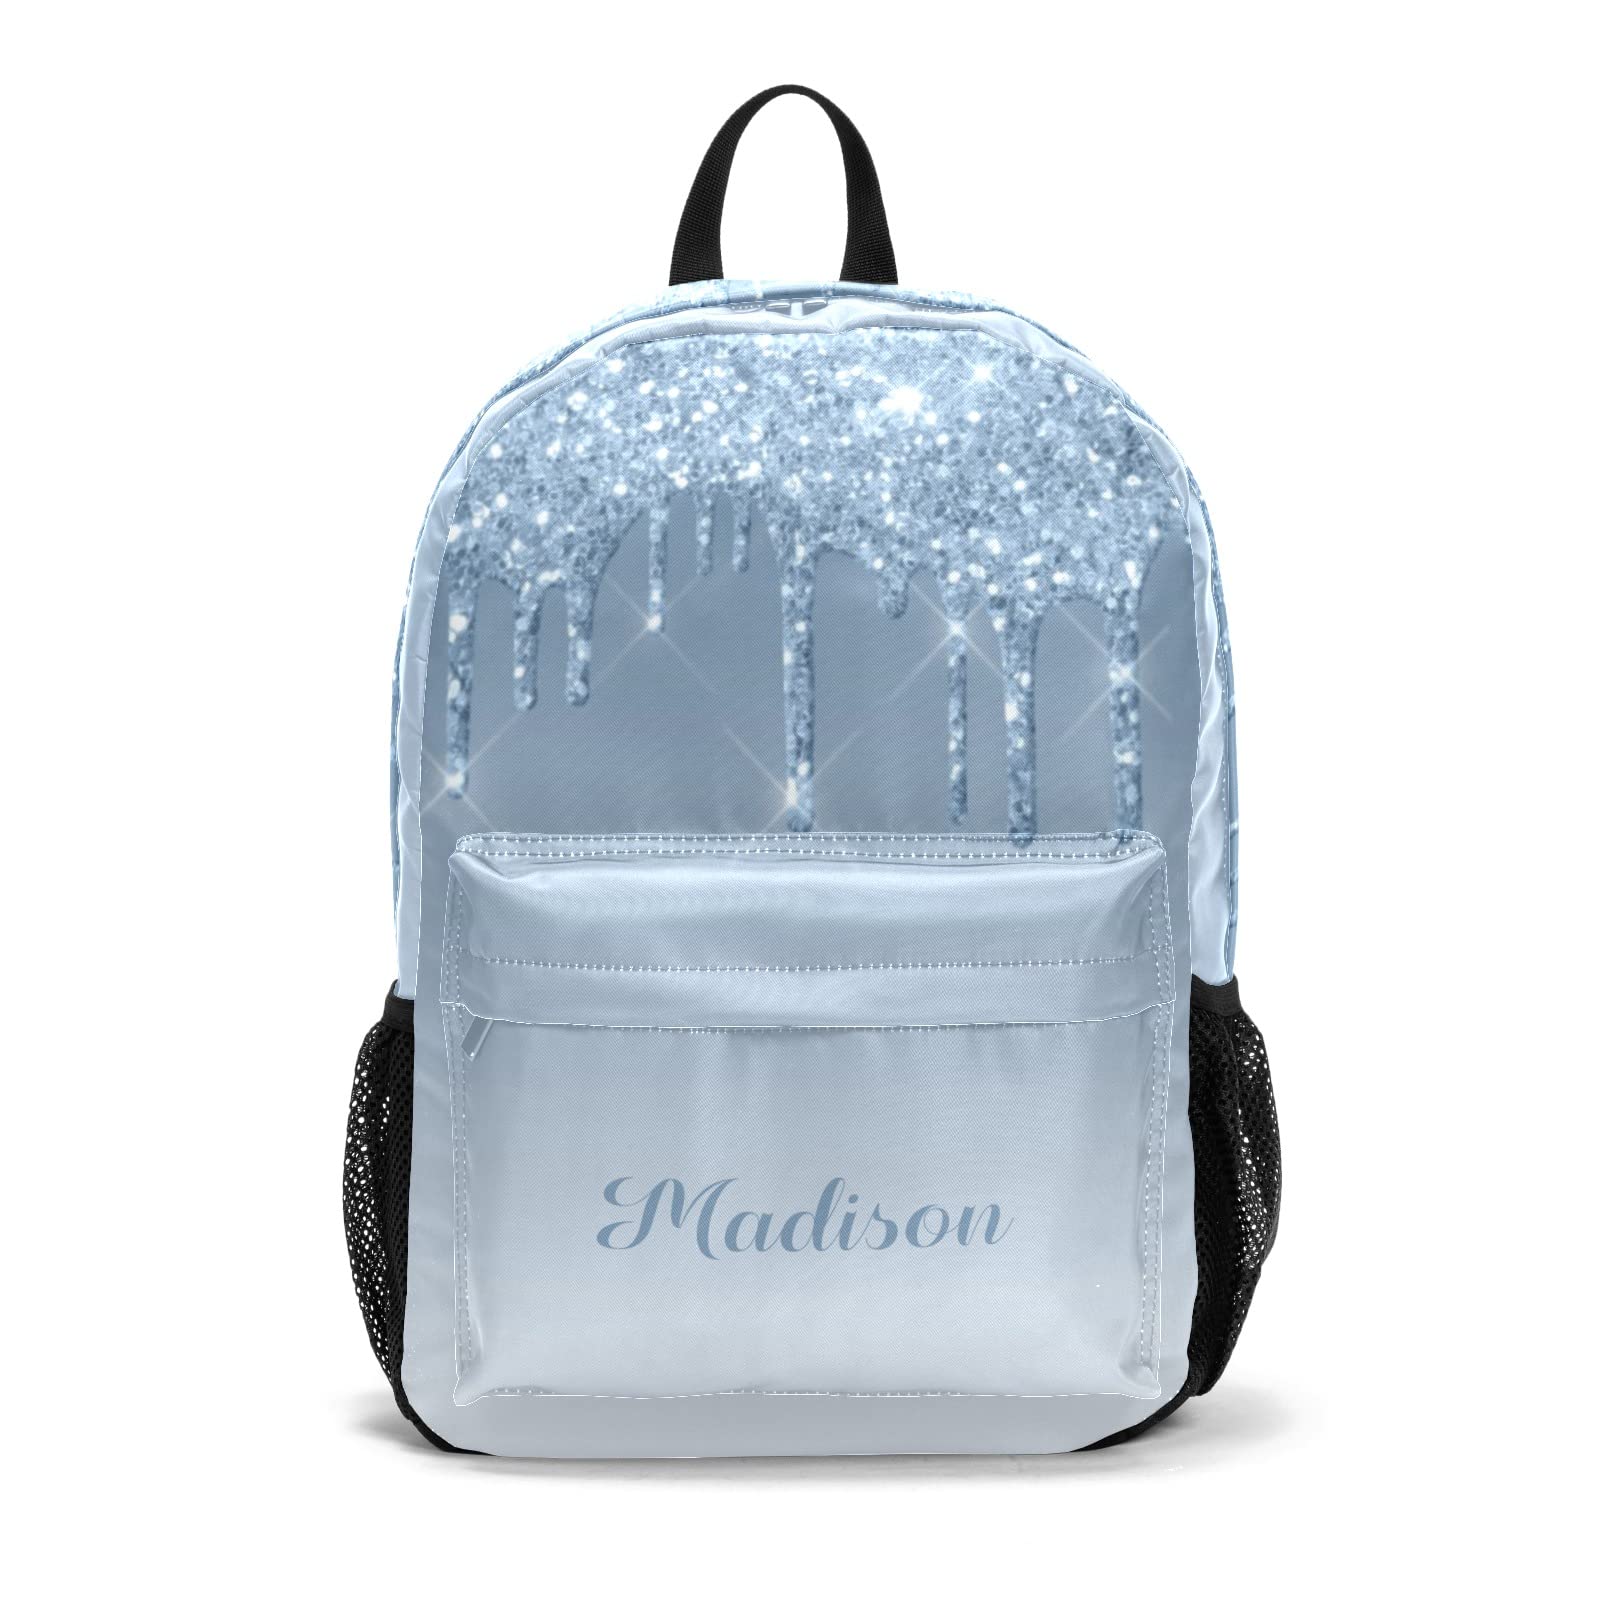 NZOOHY Dripping Glitter Blue Personalized Backpack Custom Text Unisex Bookbag for Boy Girl Travel Daypack Bag Purse 17.7 IN